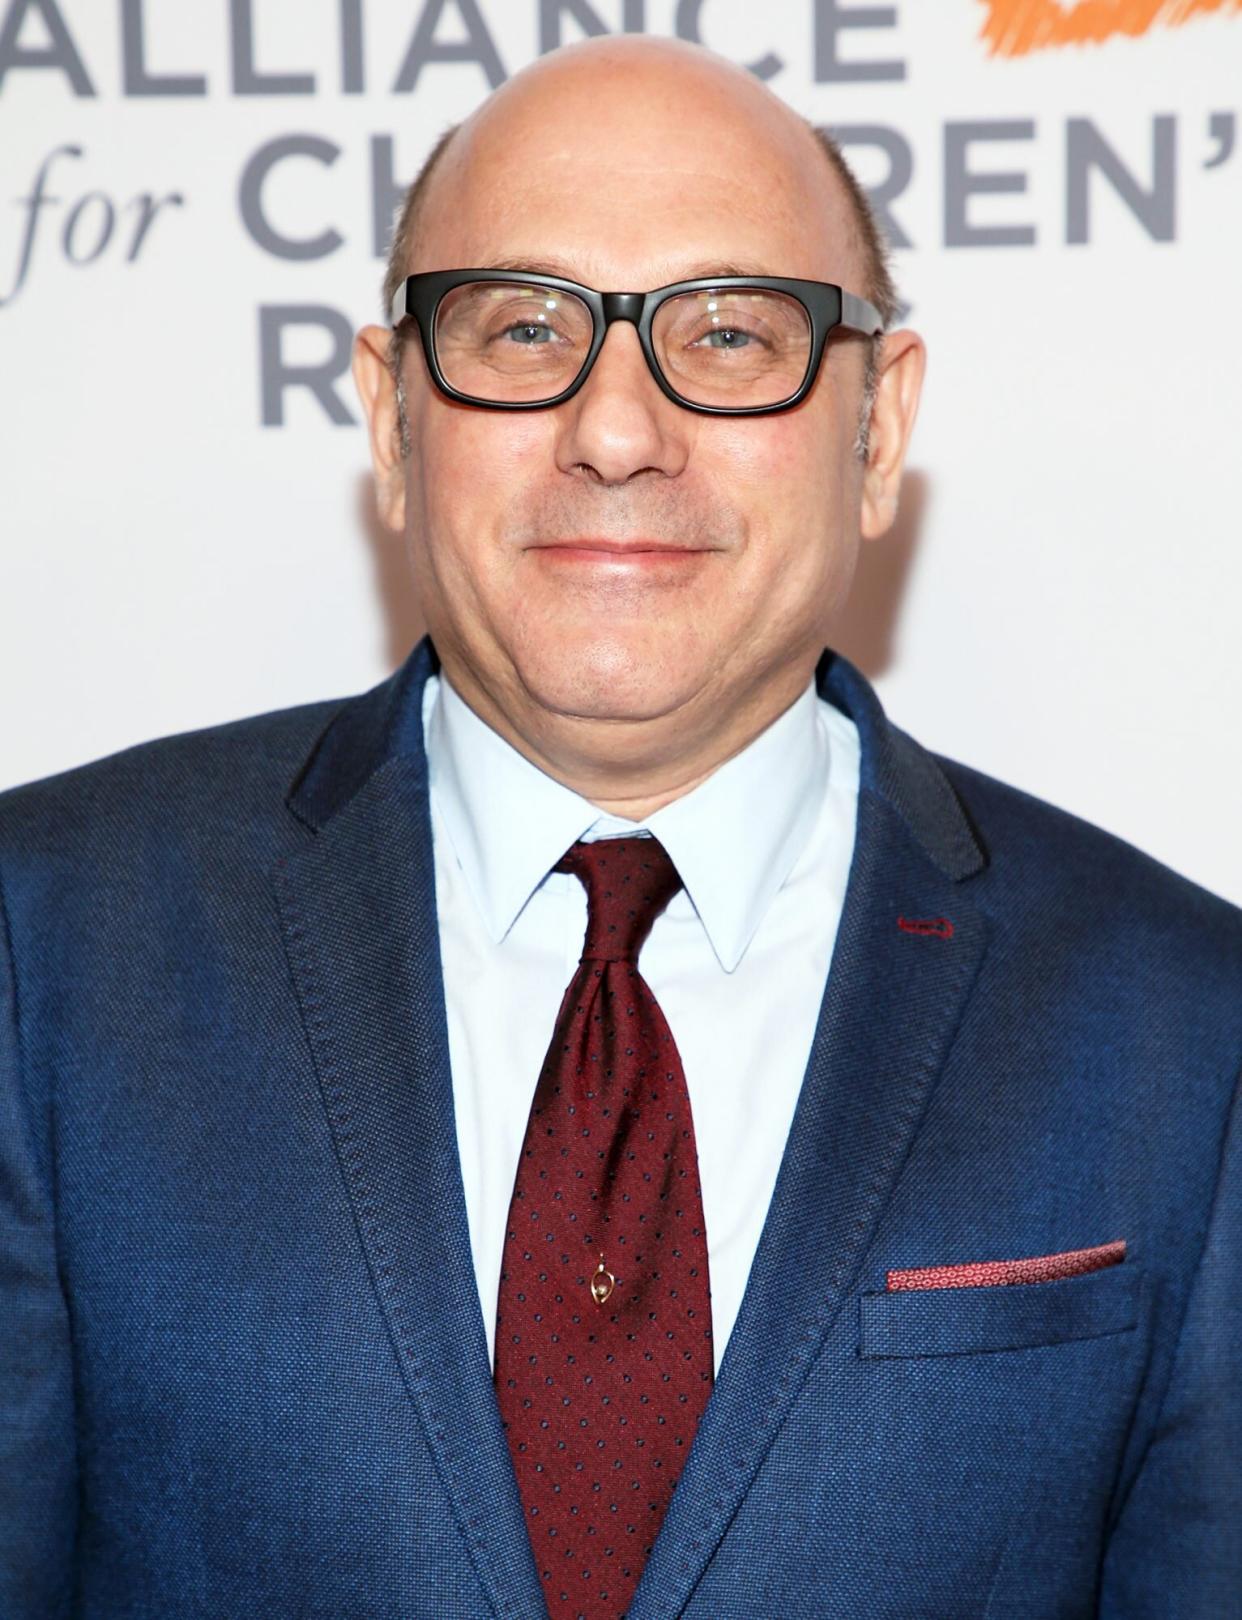 Willie Garson attends The Alliance For Children's Rights 28th Annual Dinner at The Beverly Hilton Hotel on March 05, 2020 in Beverly Hills, California